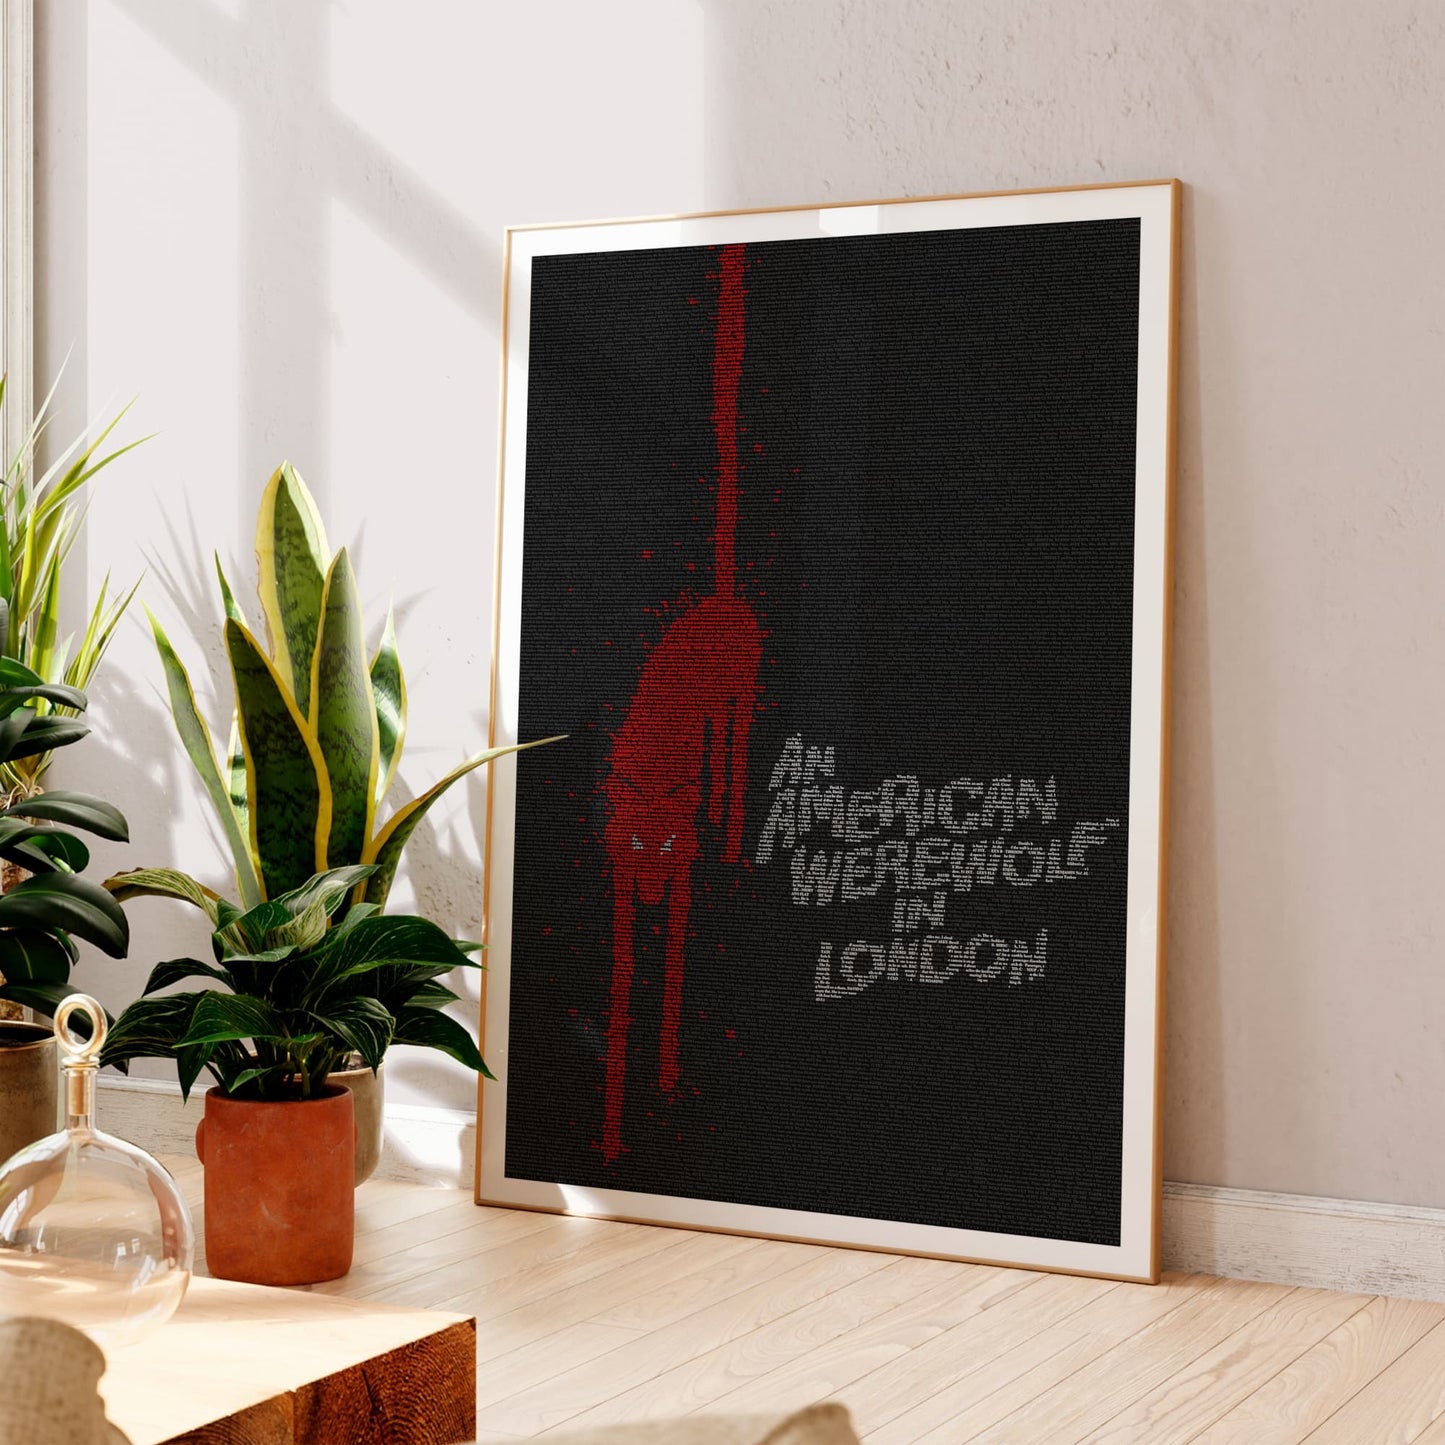 An American Werewolf In London movie poster, created from the script. Framed in a sunlit room